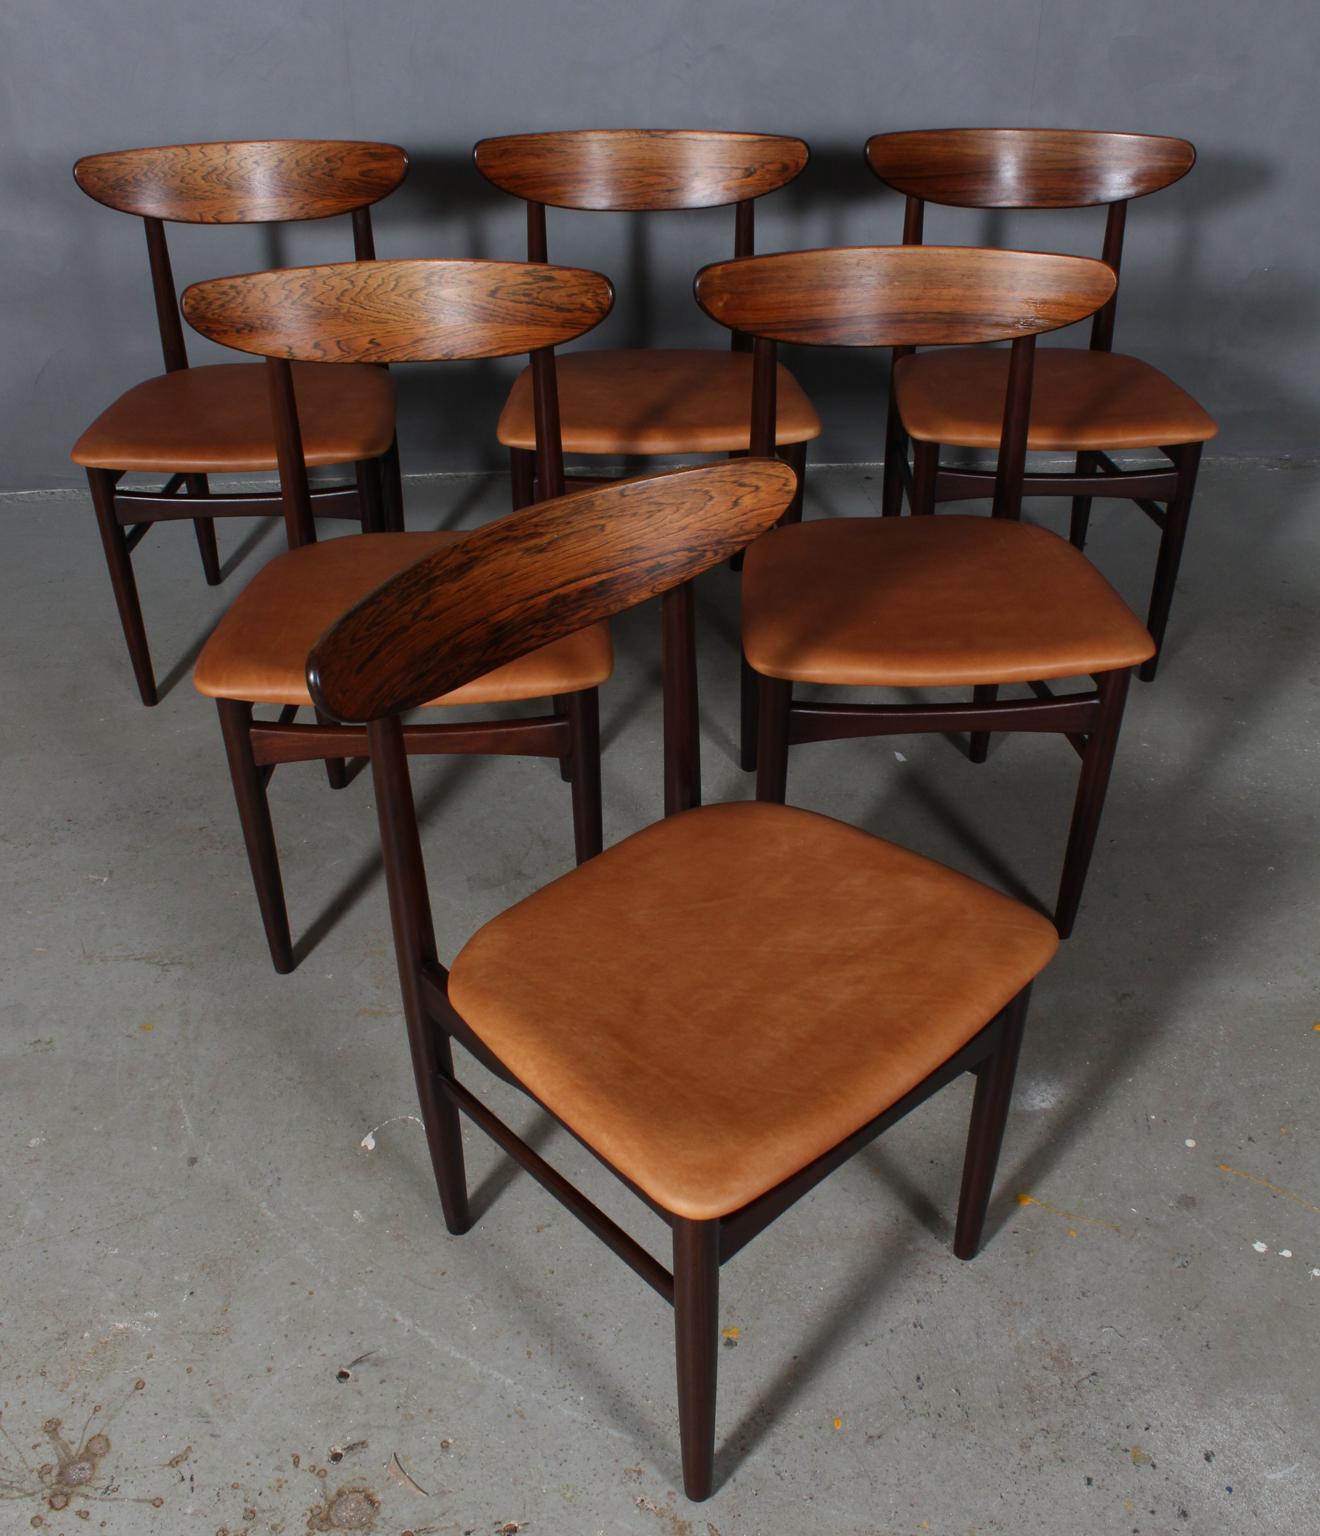 Skovby Møbler. Set of six chairs in rosewood.

New upholstered seats with tan vintage aniline leather.

Made by Skovby Møbler.